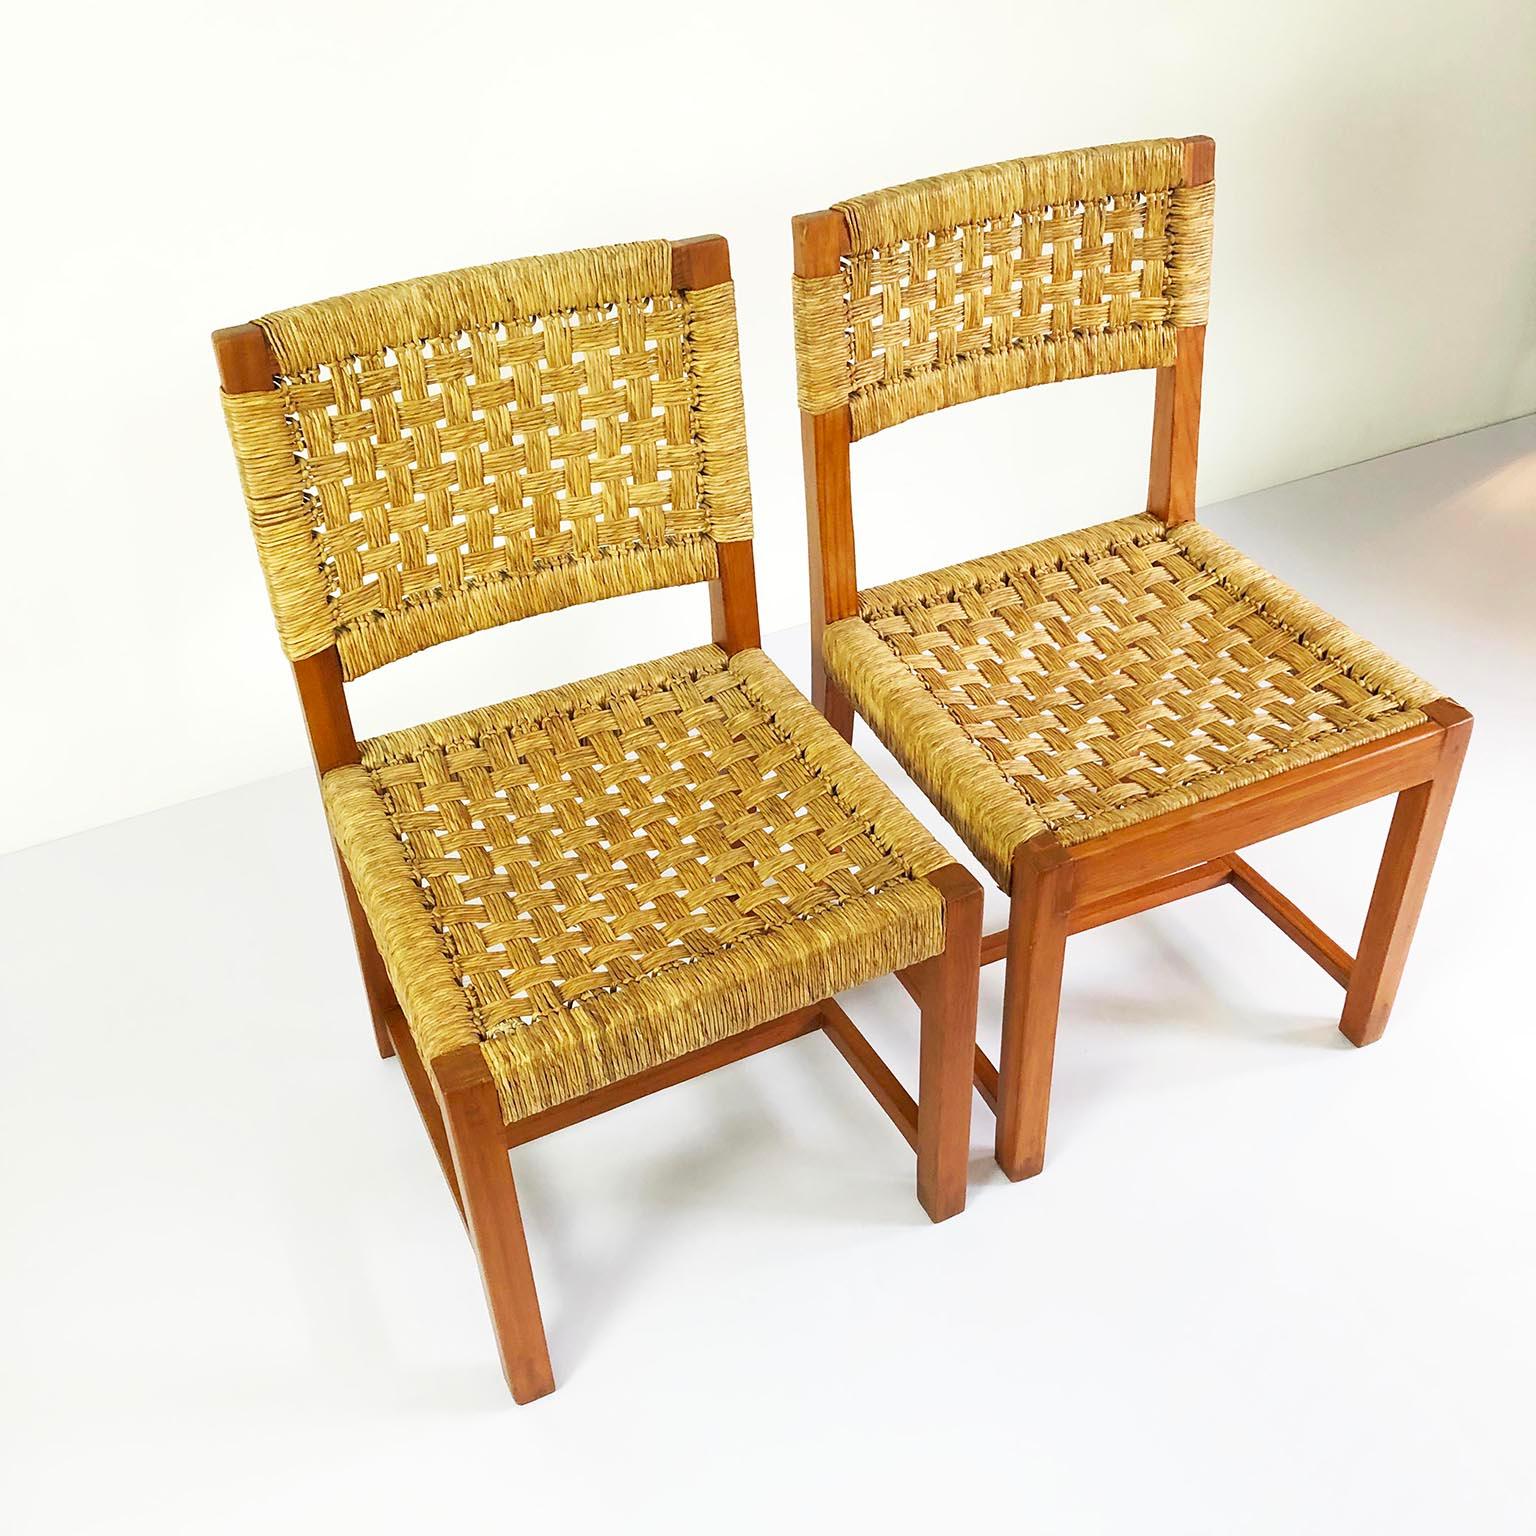 We offer this set of six Mexican chairs in the style of Michael van Beuren, made in pine with palm cords, recently refinished, circa 1960.